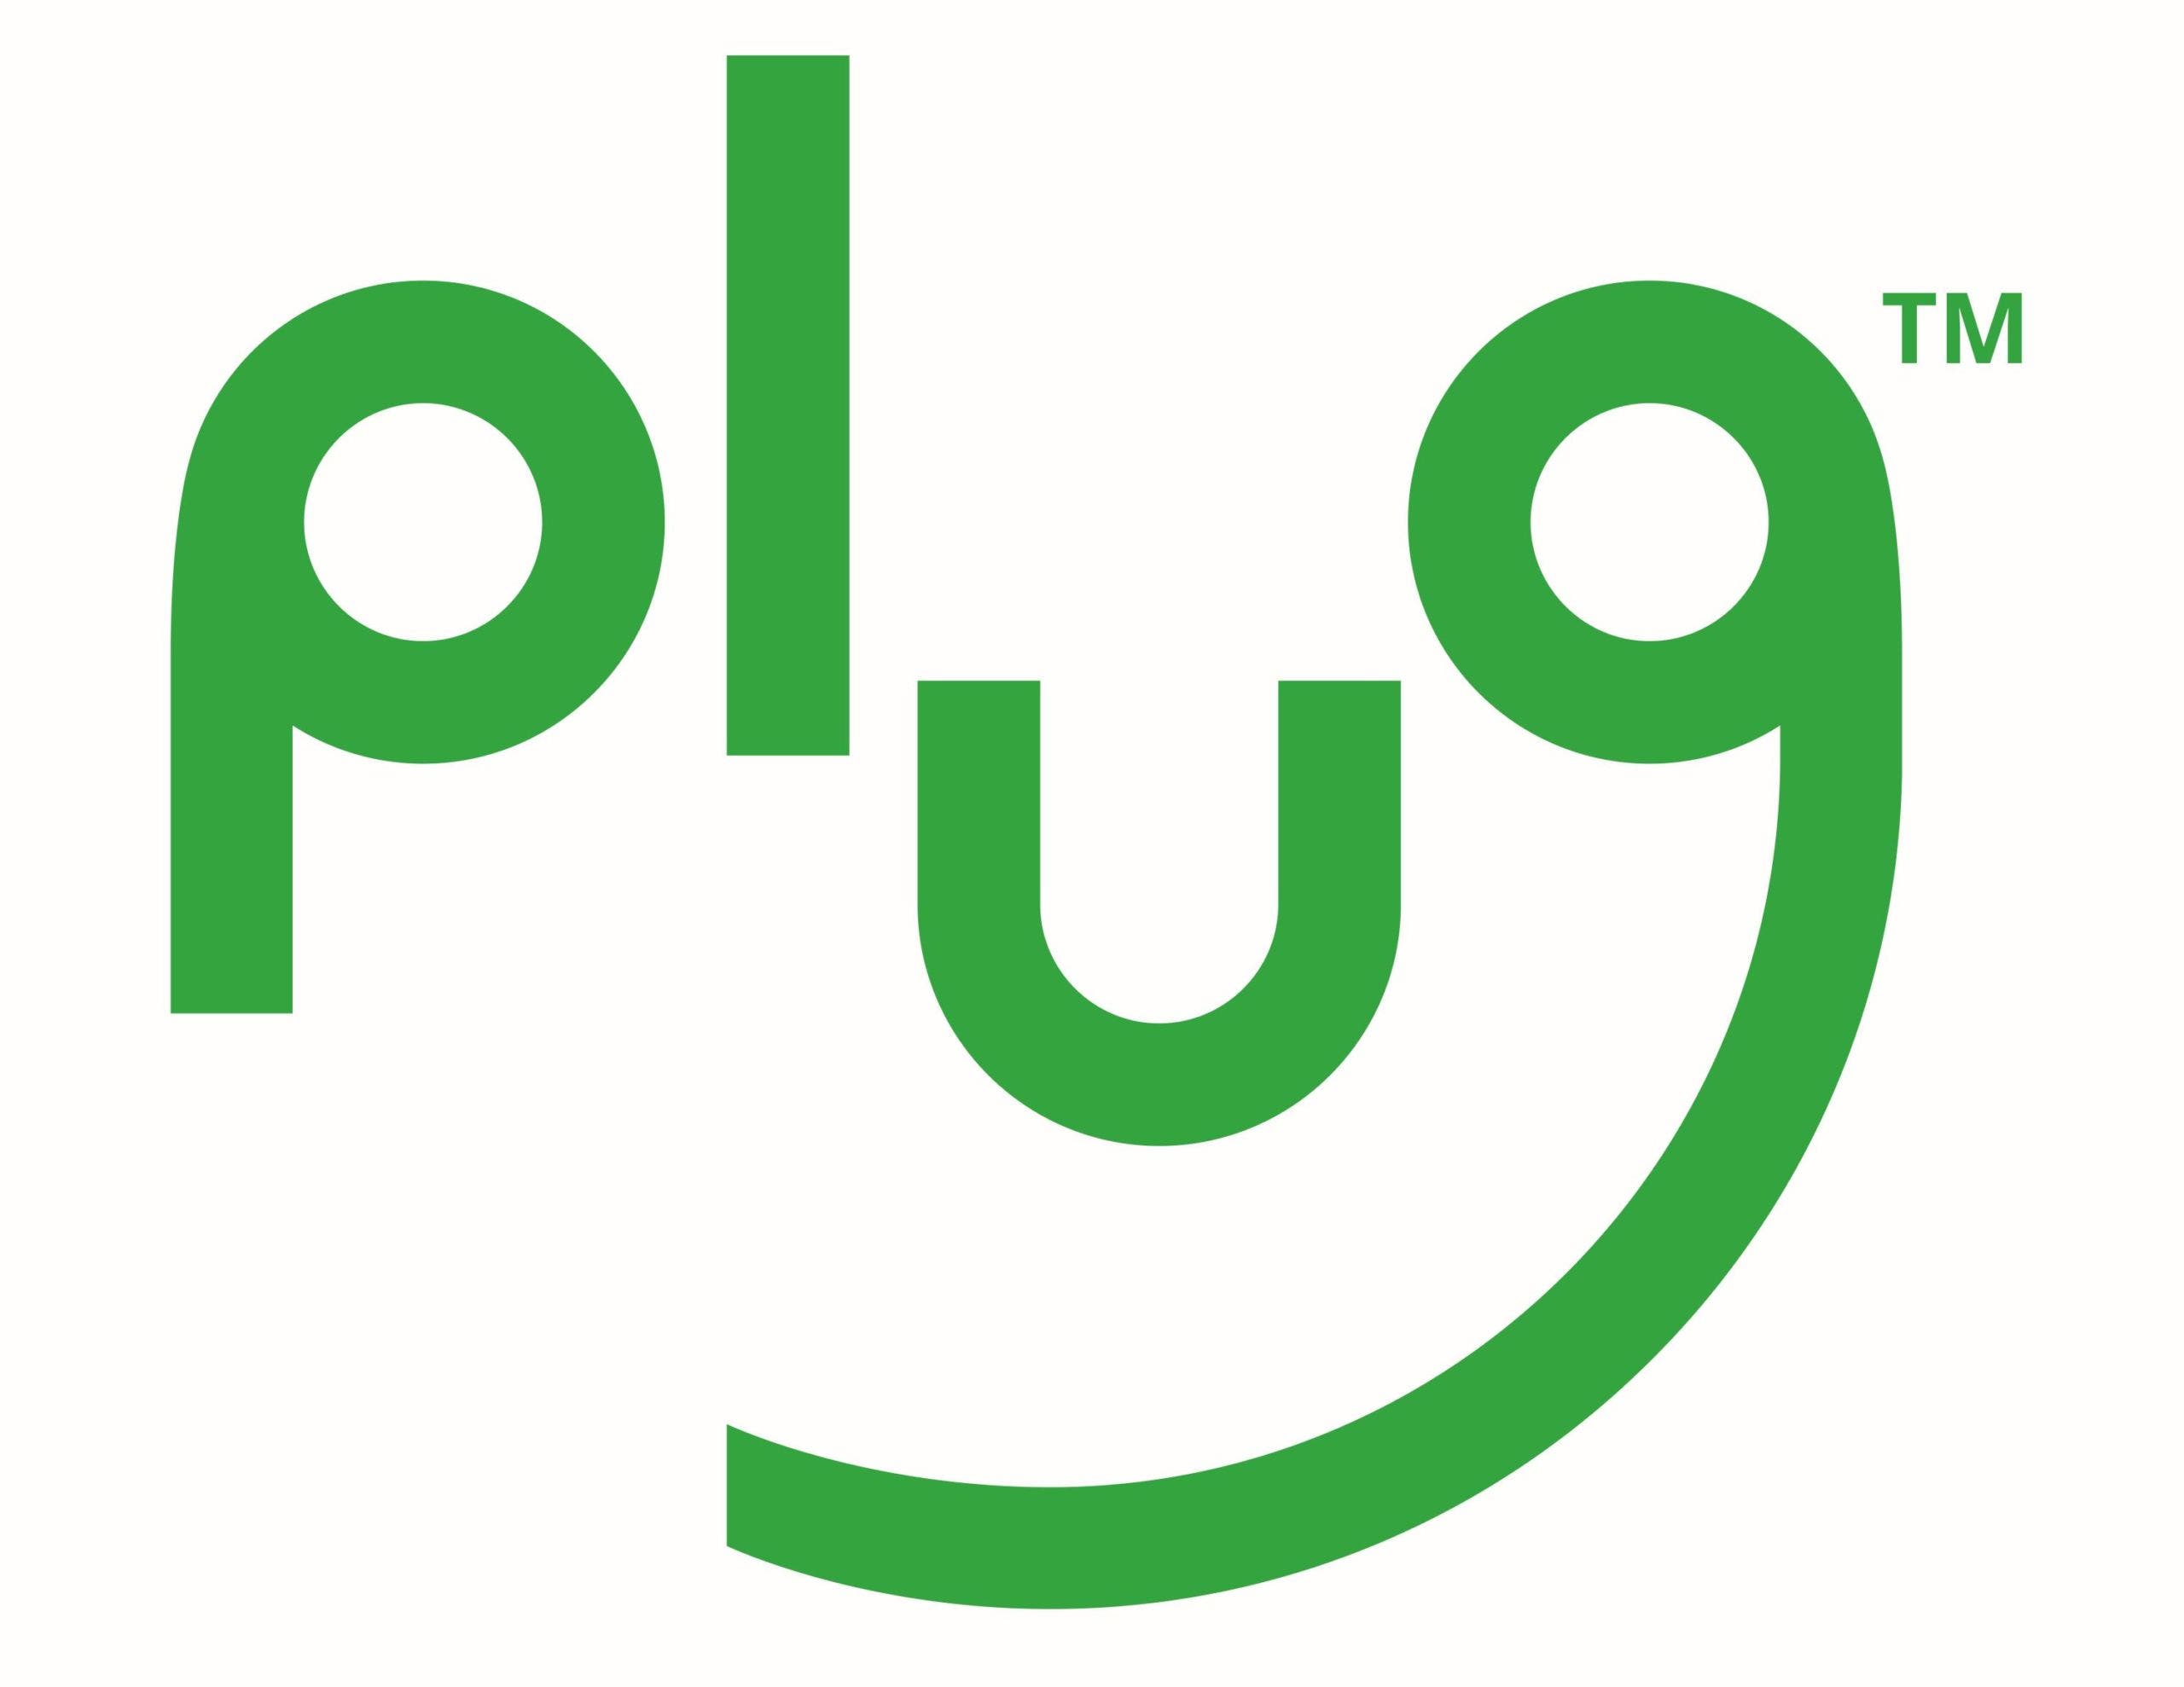 Plug Power Q2 Earnings Takeaways: Revenue Miss, Cost Reduction Efforts, Focus On Becoming 'Category King' In Hydrogen Economy